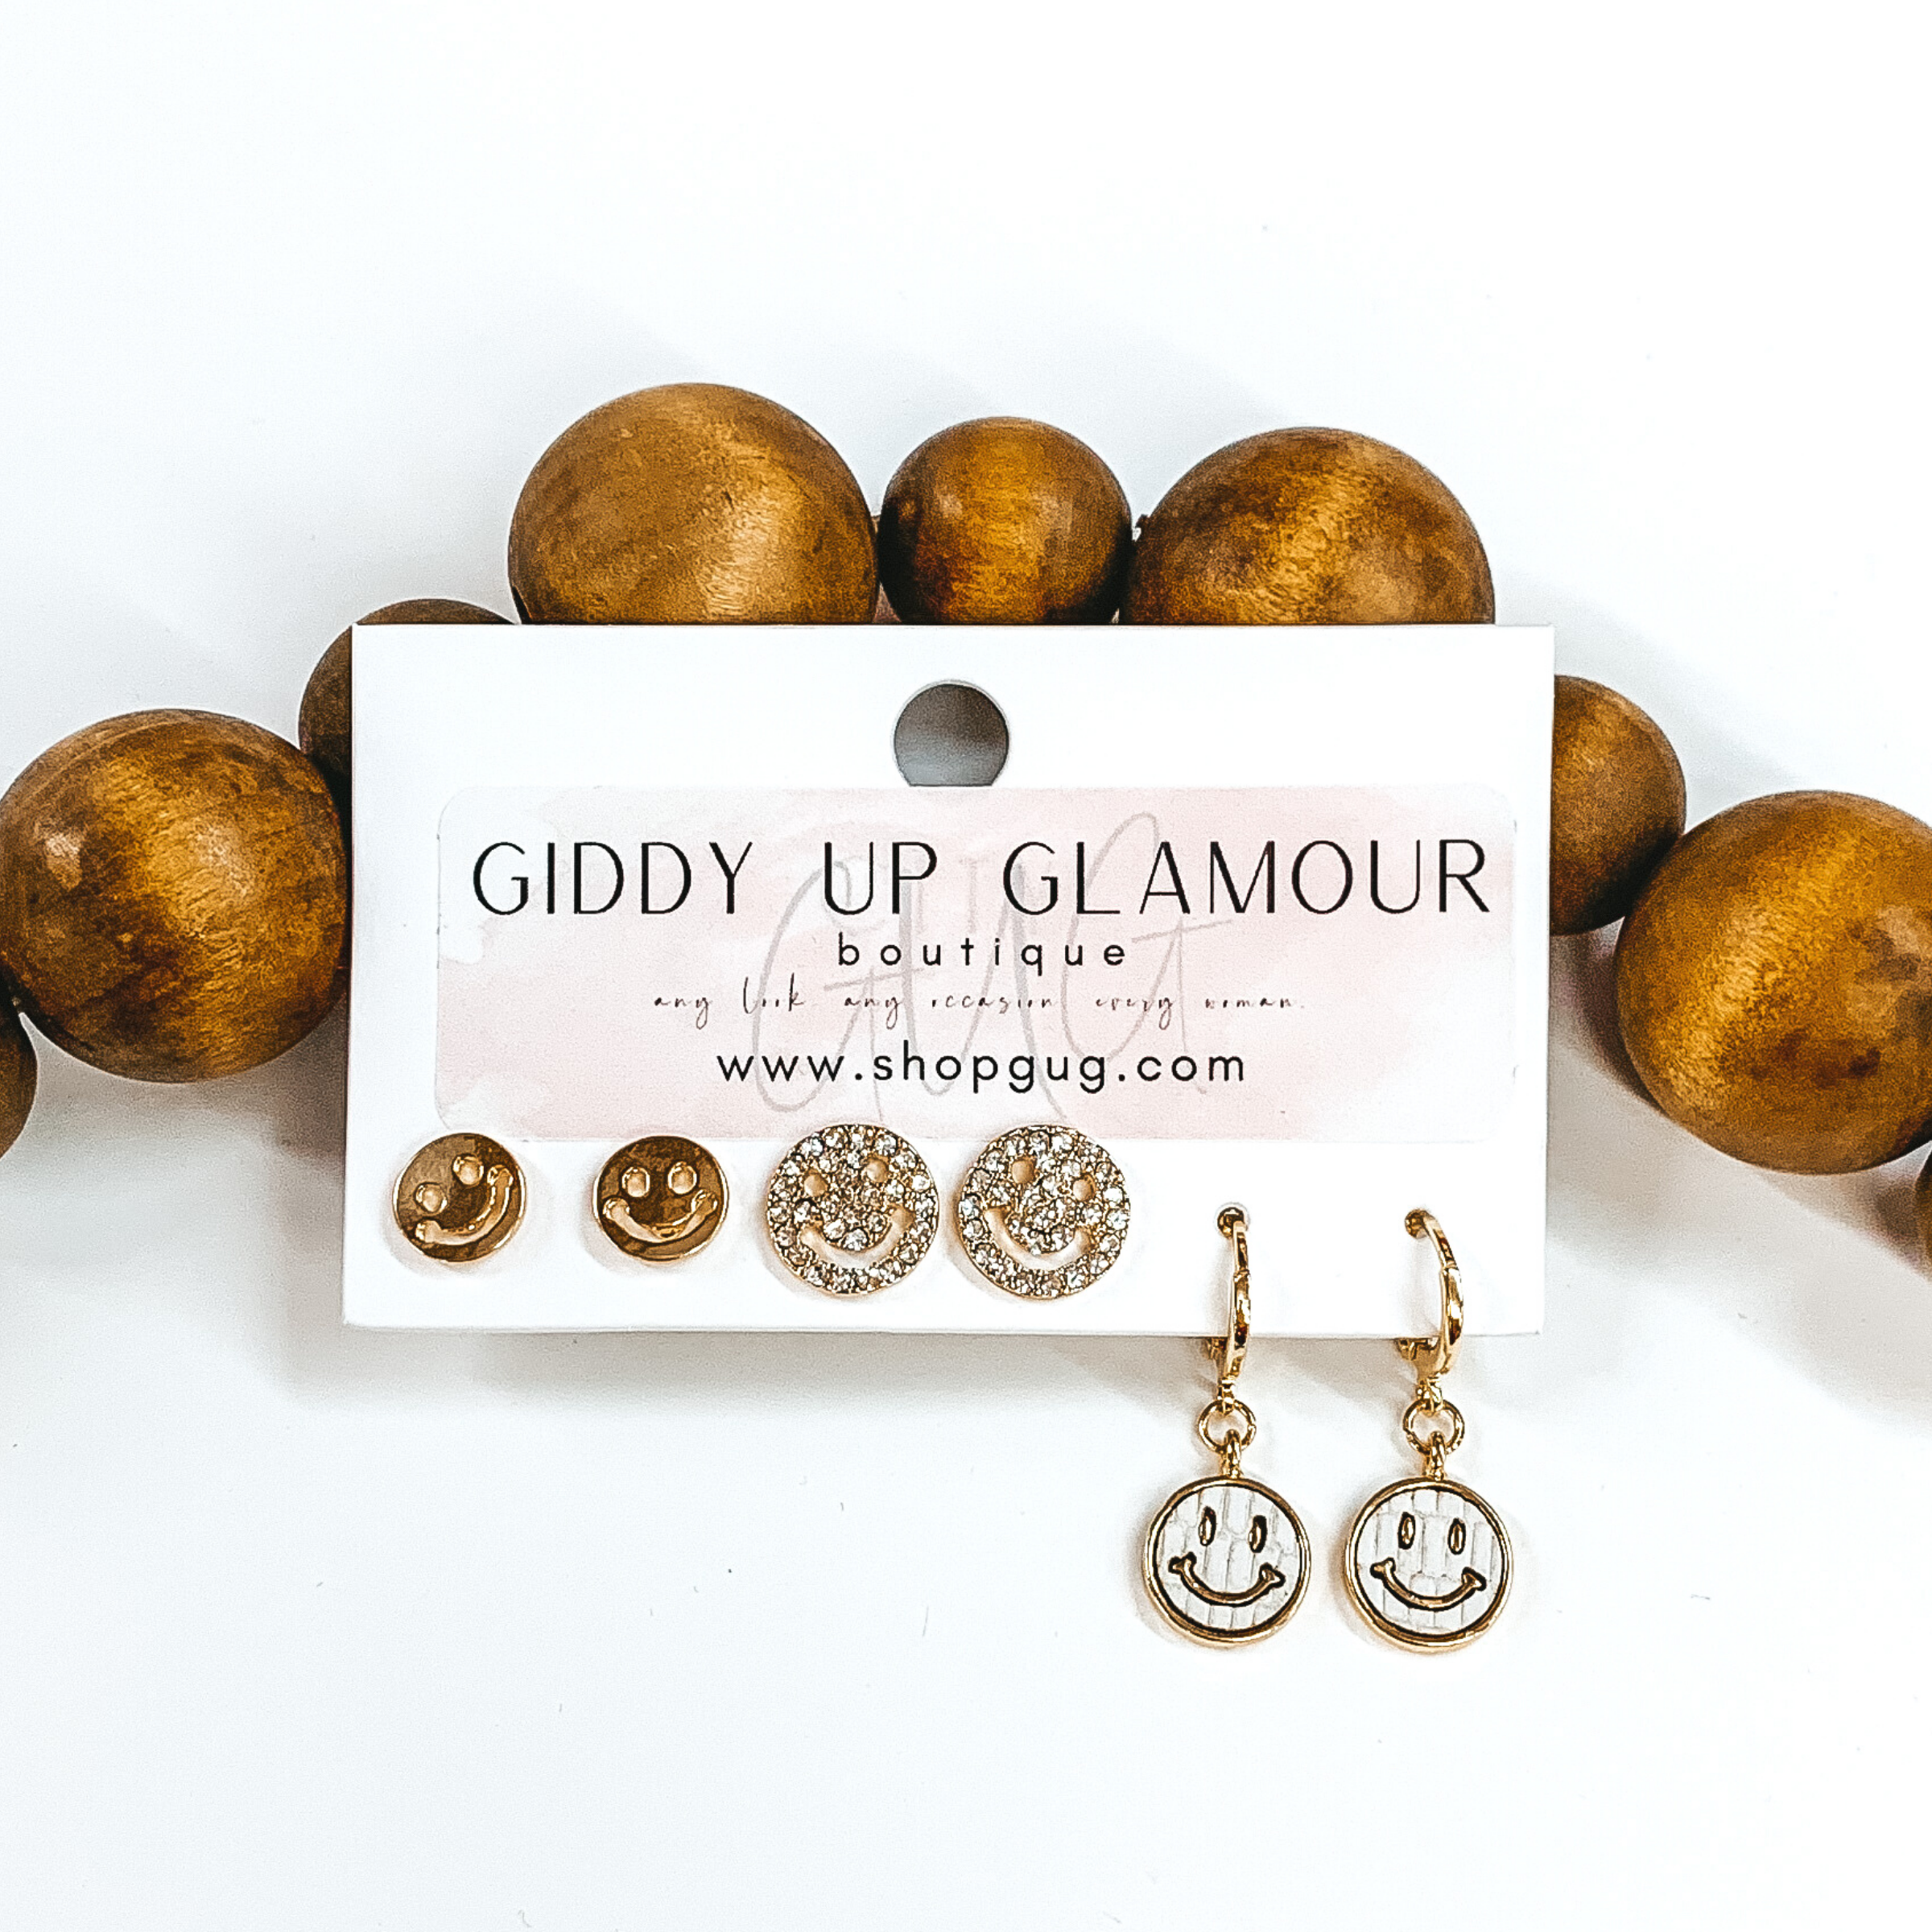 This is a 3 piece gold and pearl earring set. There is a pair of gold smiley face studs, a gold pair smiley face studs with clear crystals, and a pair of dangle pearls with hanging circle white pendant with a gold smiley face. These earrings are pictured on a Giddy Up Glamour earring holder laying in front of tan beads on a white background.